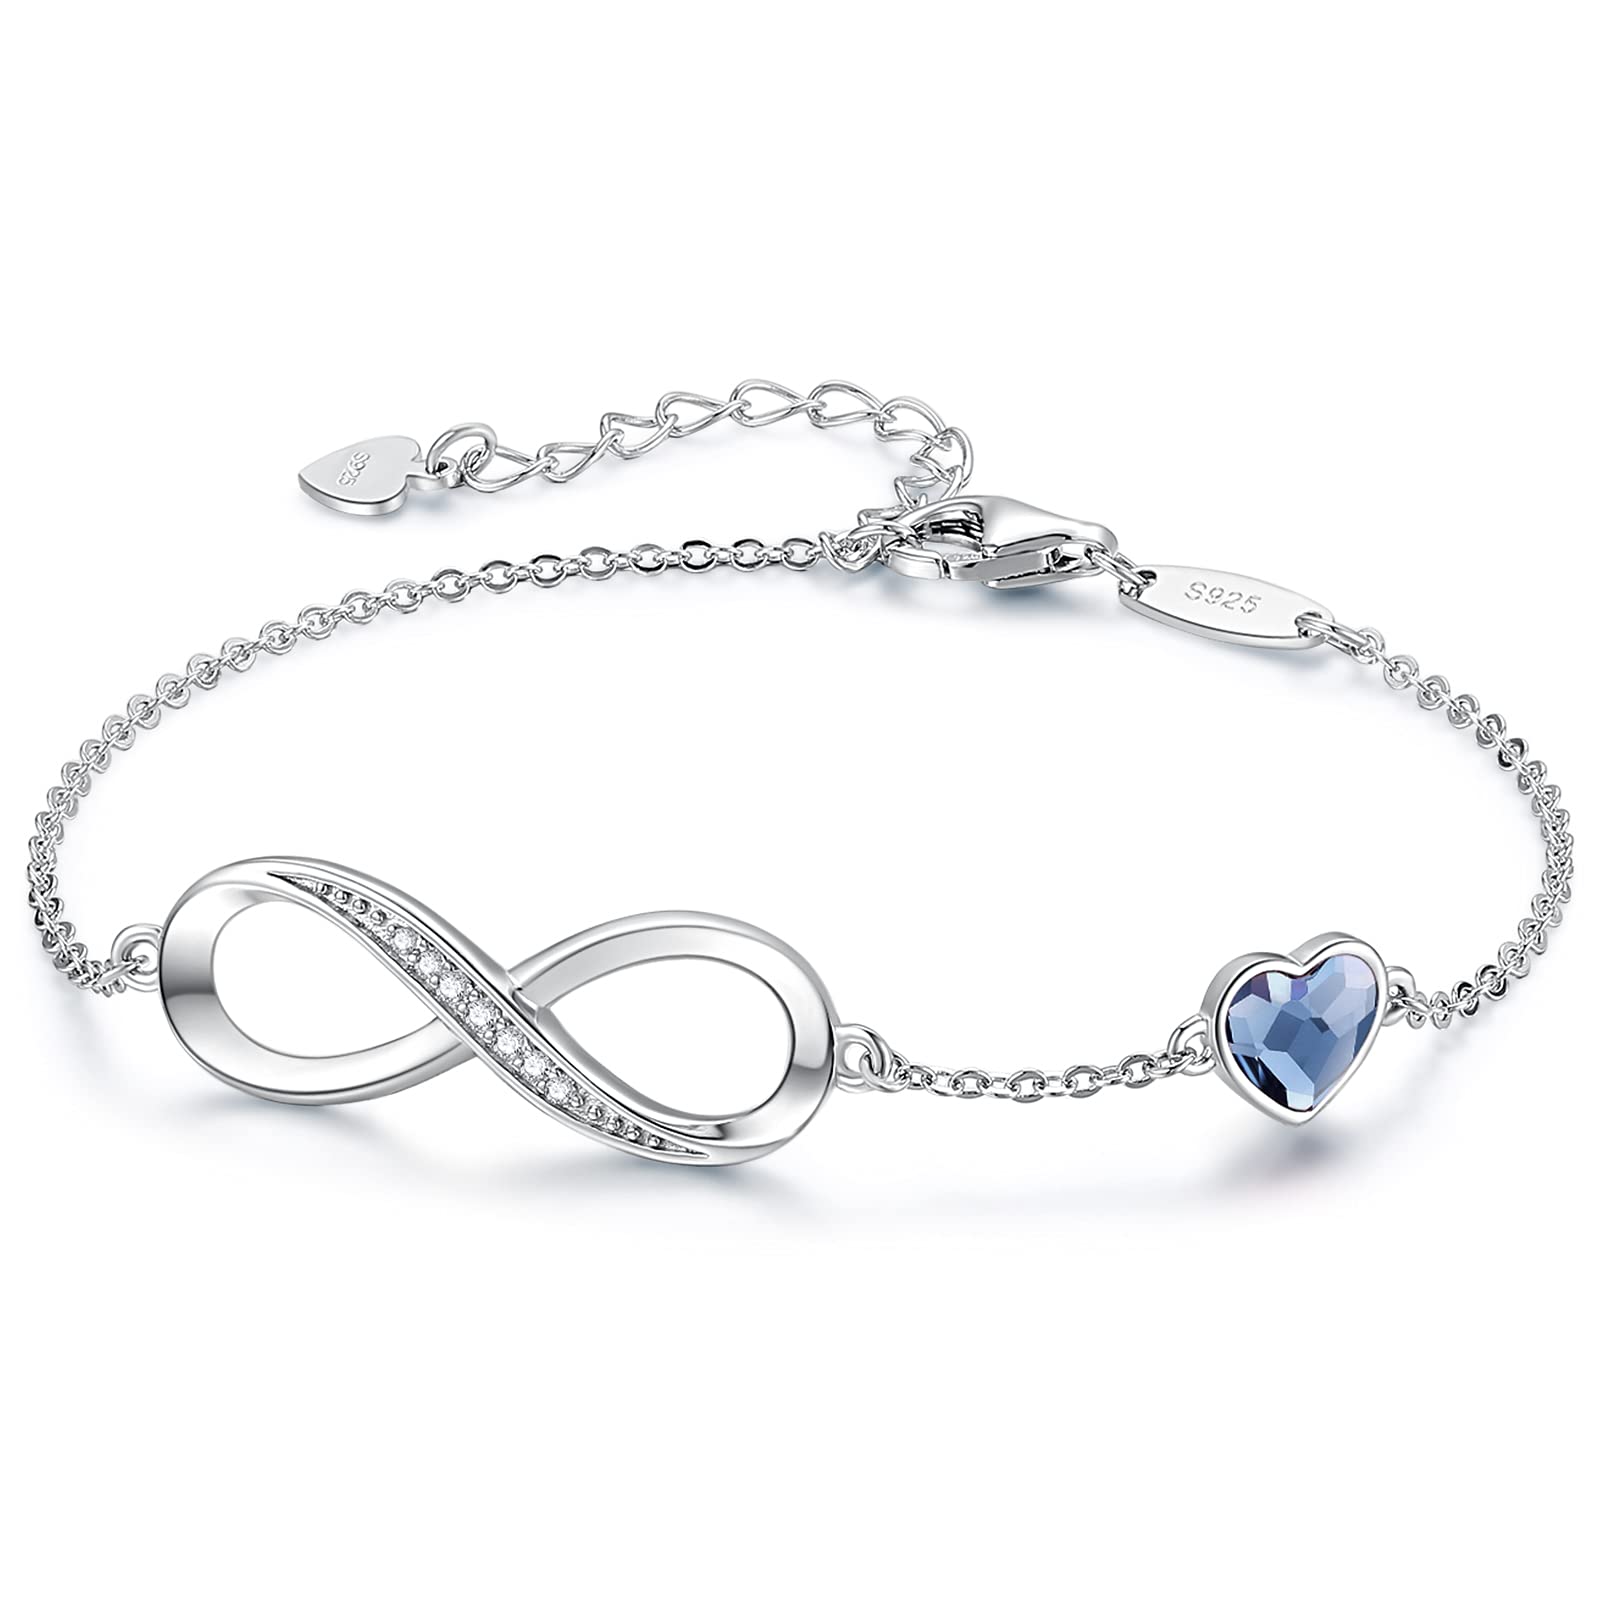 CDE Infinity Heart Symbol Charm Link Bracelet for Women 925 Sterling Silver Stainless Steel Adjustable Anniversary Jewelry Birthday Gifts for Women Wife Girlfriend Her